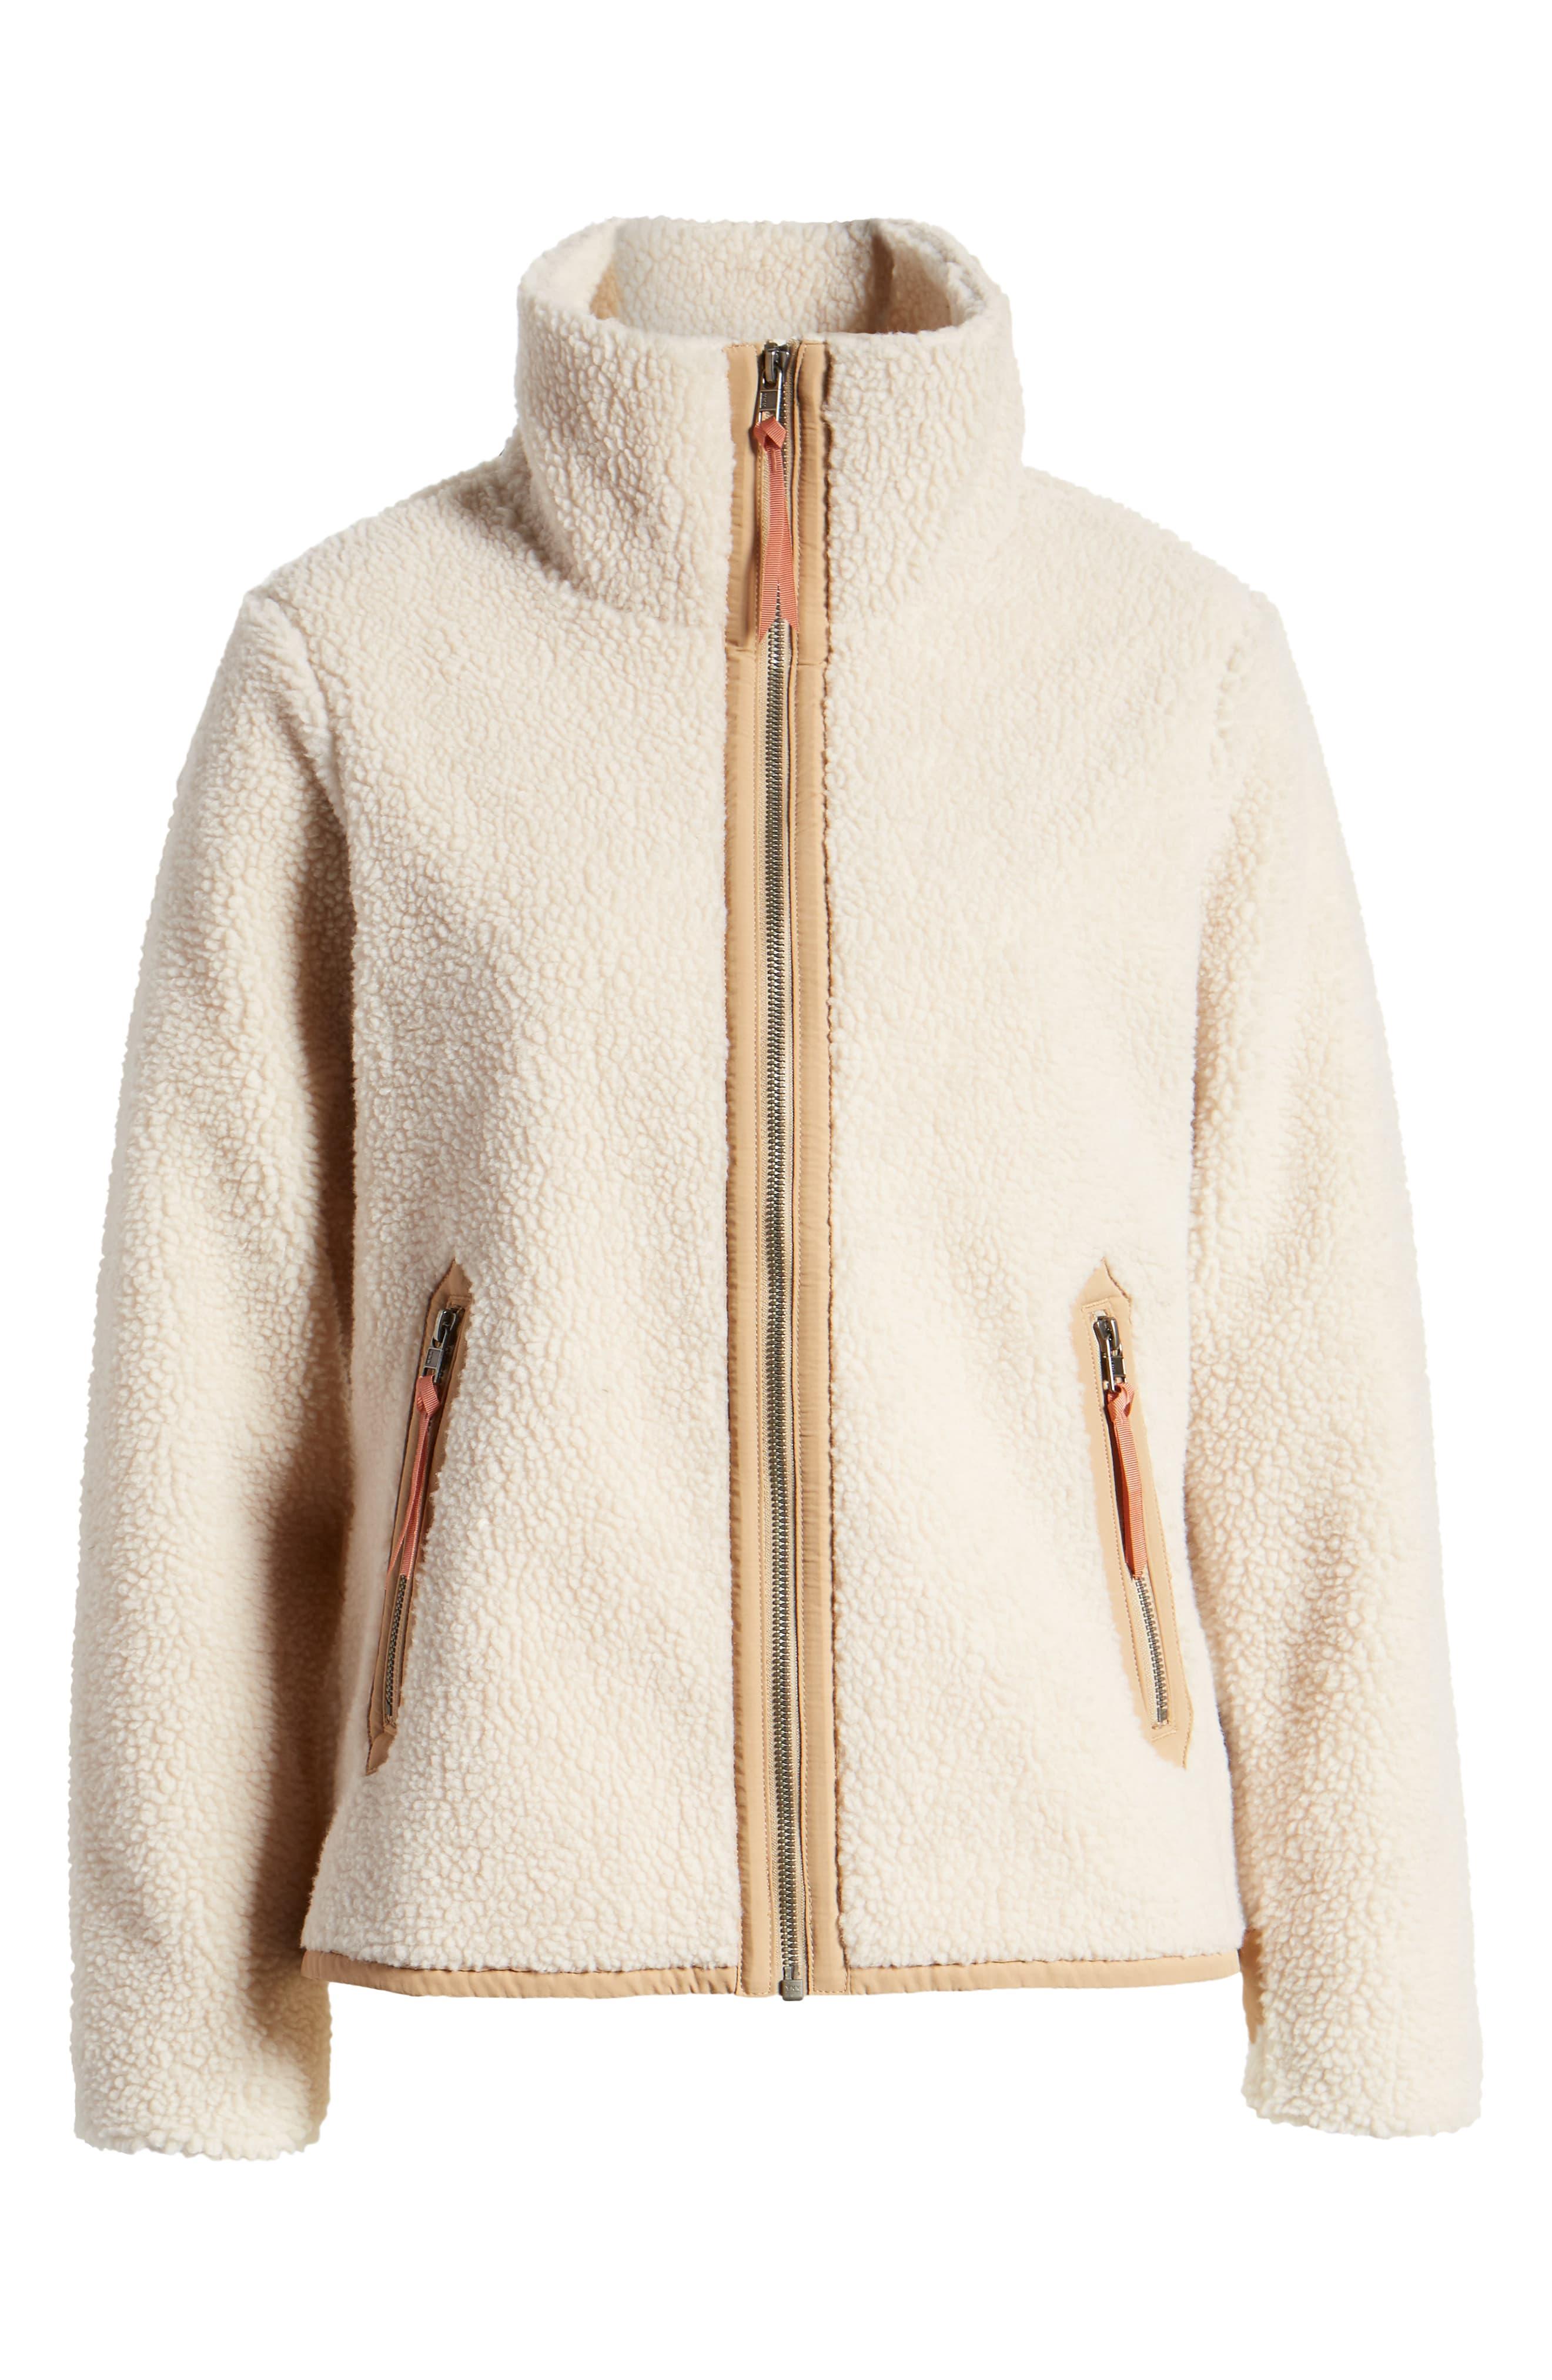 Patagonia Divided Sky High Pile Fleece Jacket in Natural | Lyst